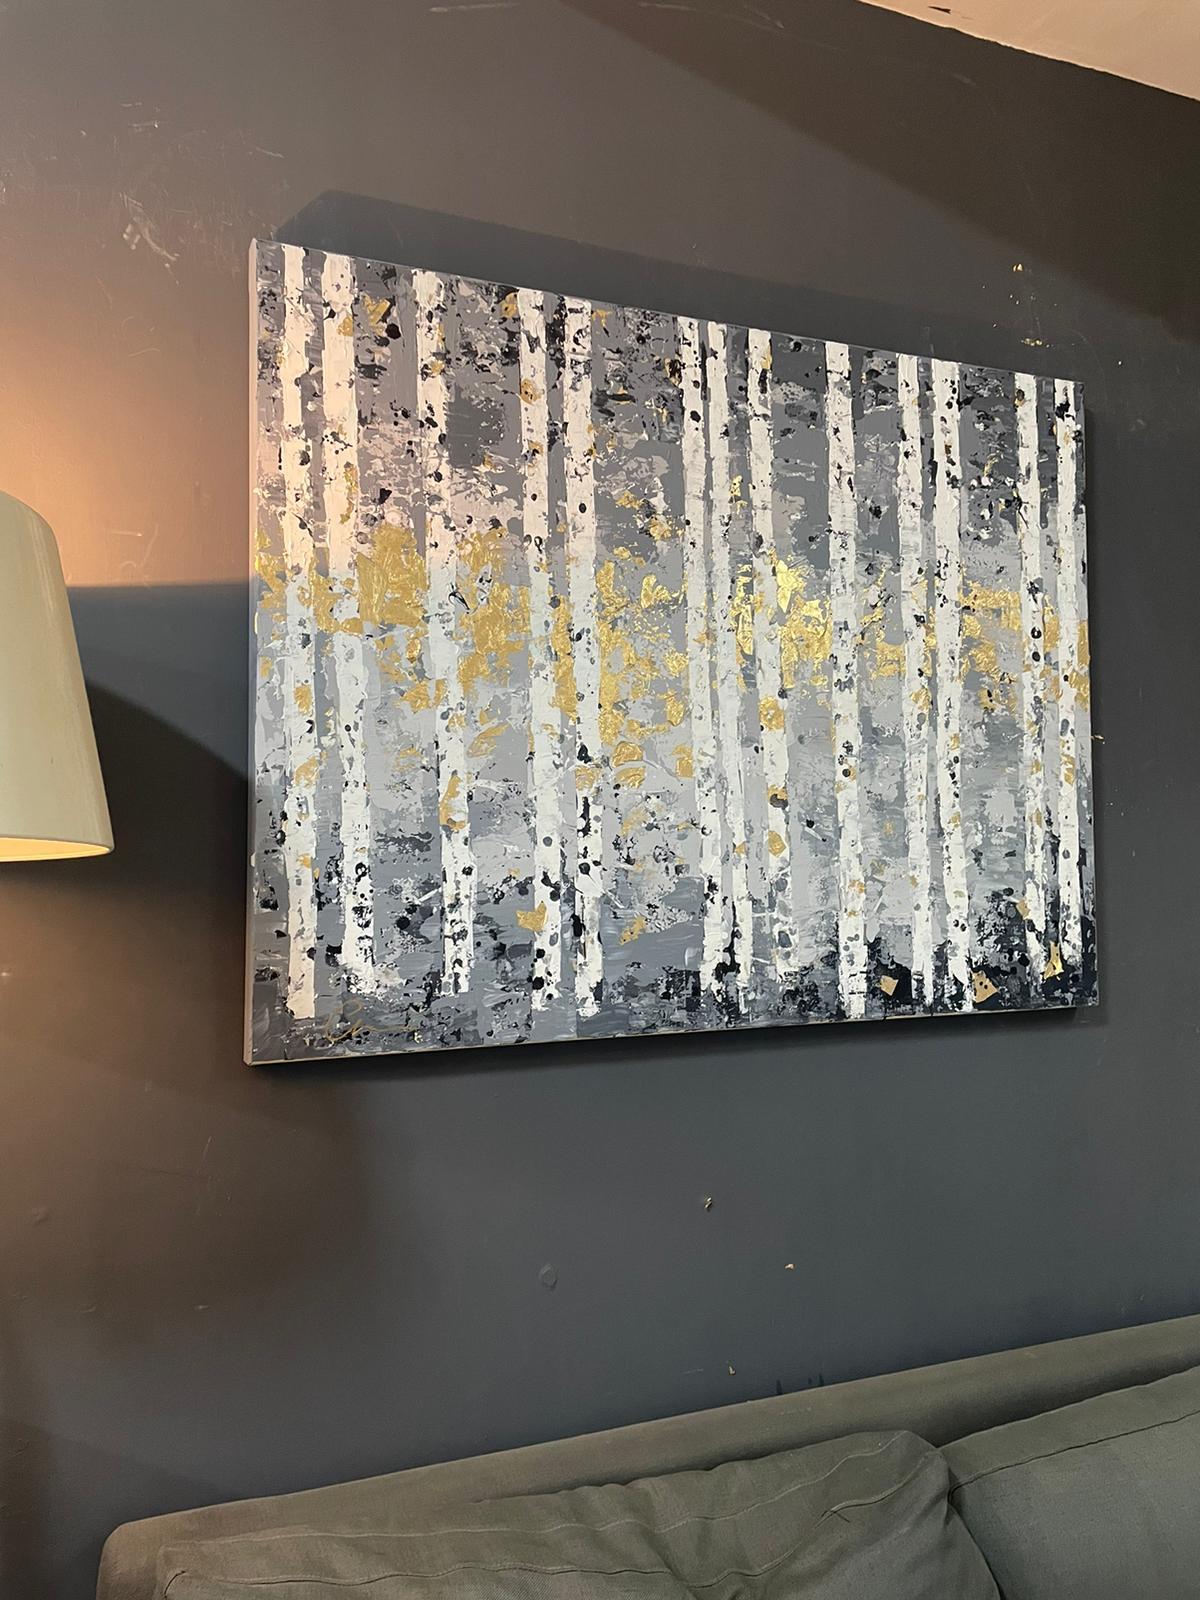 Pale Grey Woods - 21st Century, Oil painting, abstract, night, blue, gold leaf - Gray Abstract Painting by Chelsea Davine